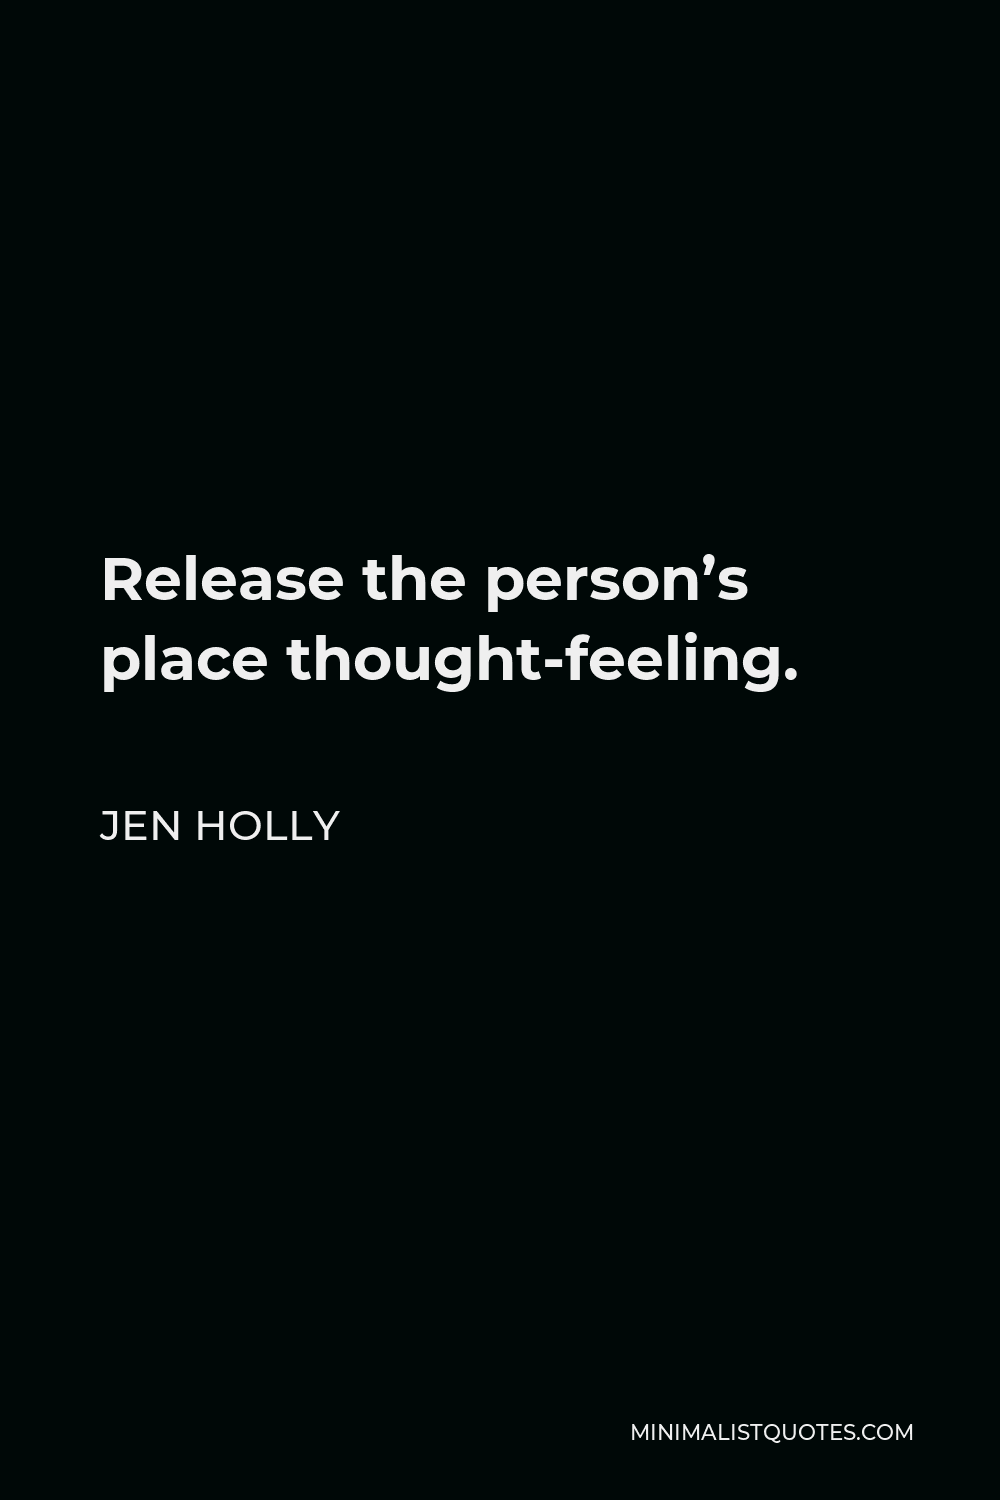 Jen Holly Quote - Release the person’s place thought-feeling.